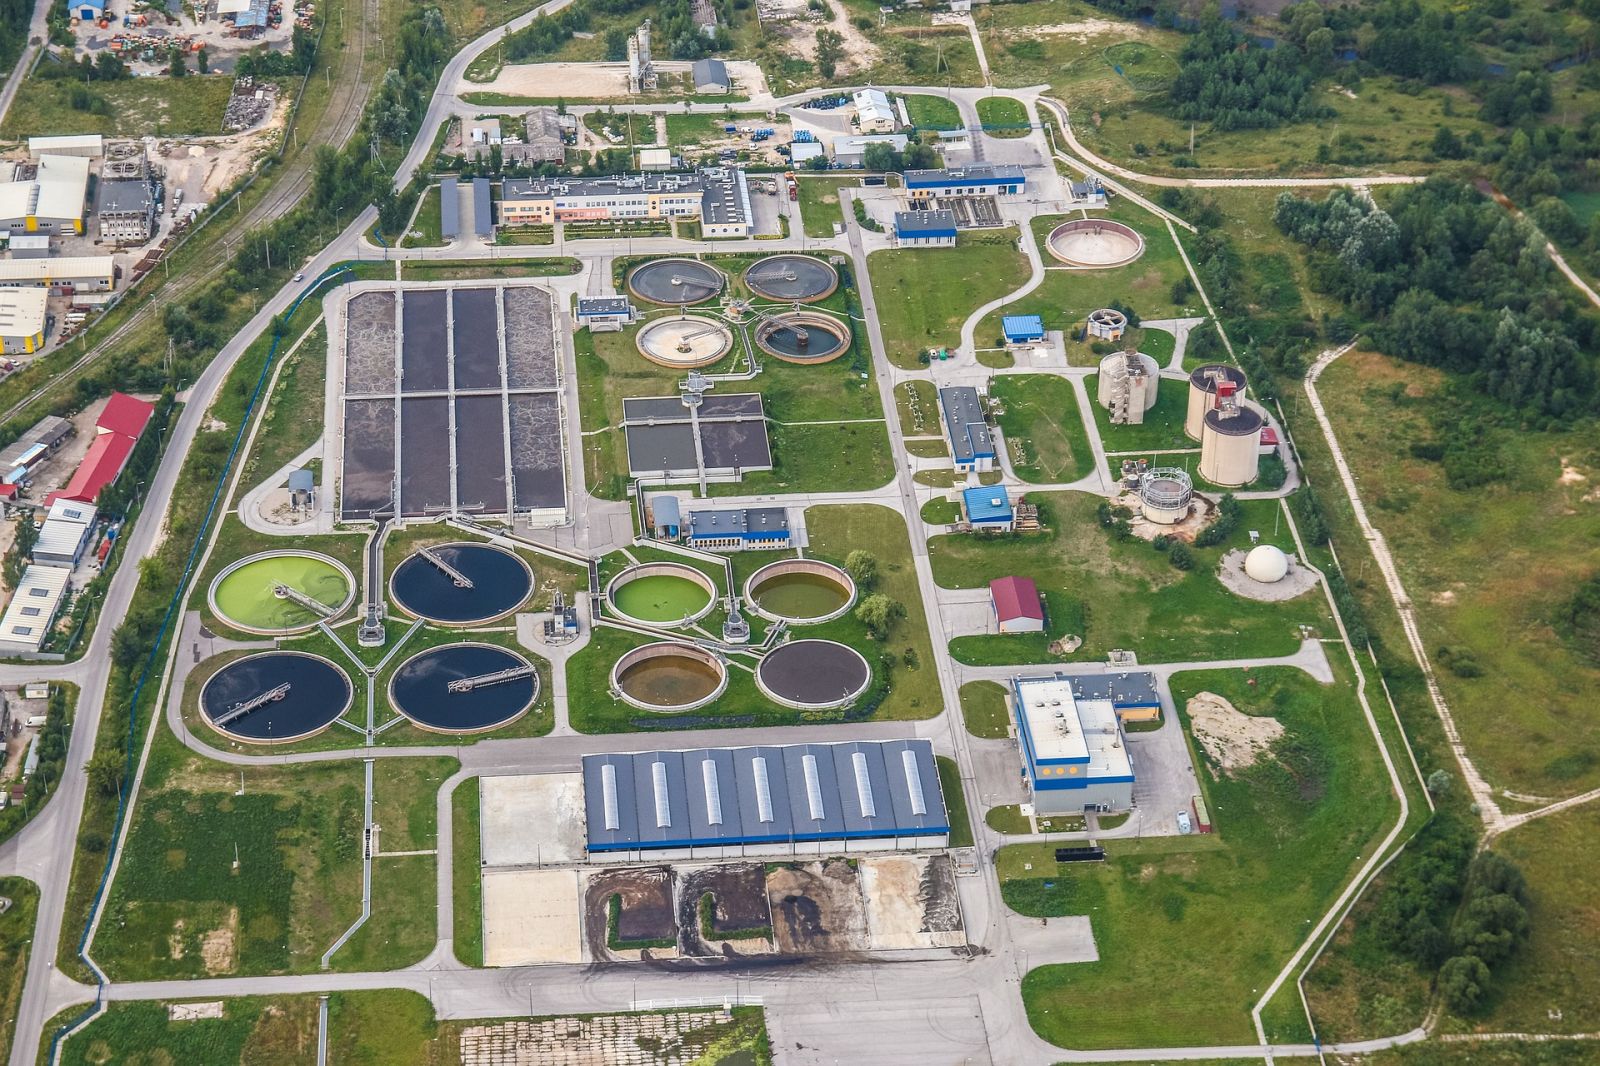 Public consultation on the Evaluation of the Urban Waste Water Treatment Directive is open